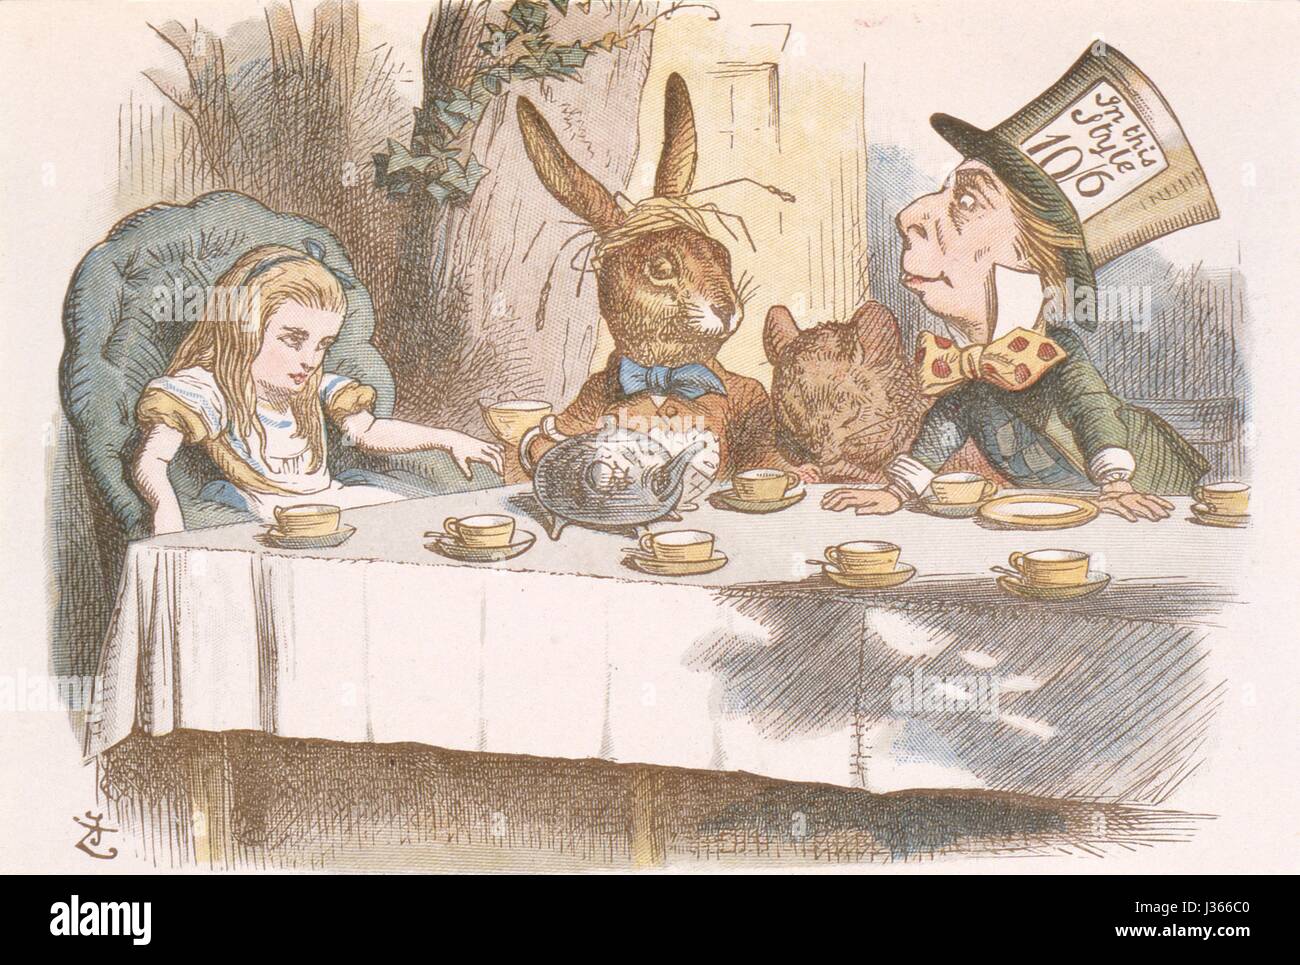 Illustration by Sir John Tenniel, watercolour by Gertrude Thomson  The Nursery Alice (Alice in Wonderland), by Lewis Carroll  London, MacMilllan, 1889.    Mad Hatter's tea party. The Nursery Alice was an abridged version of Alice in Wonderland for children aged between 0 and 5 years. Stock Photo